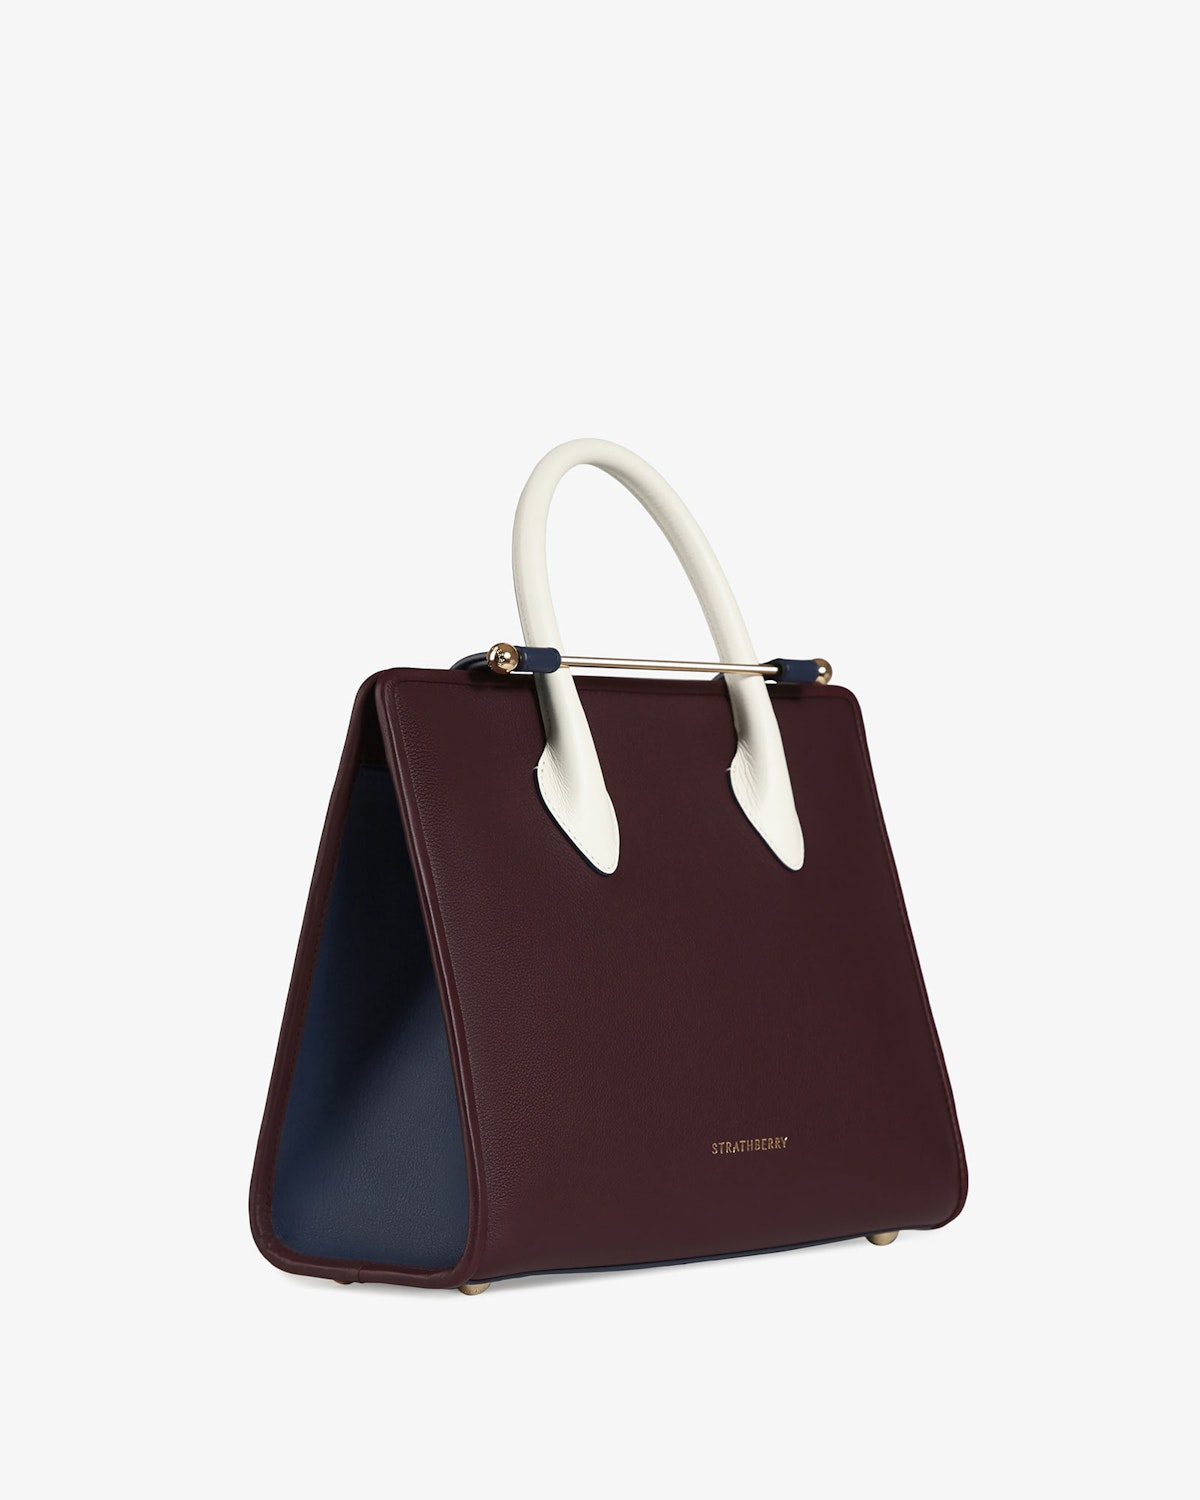 The Strathberry Midi Tote - Top Handle Leather Tote Bag - Burgundy ...